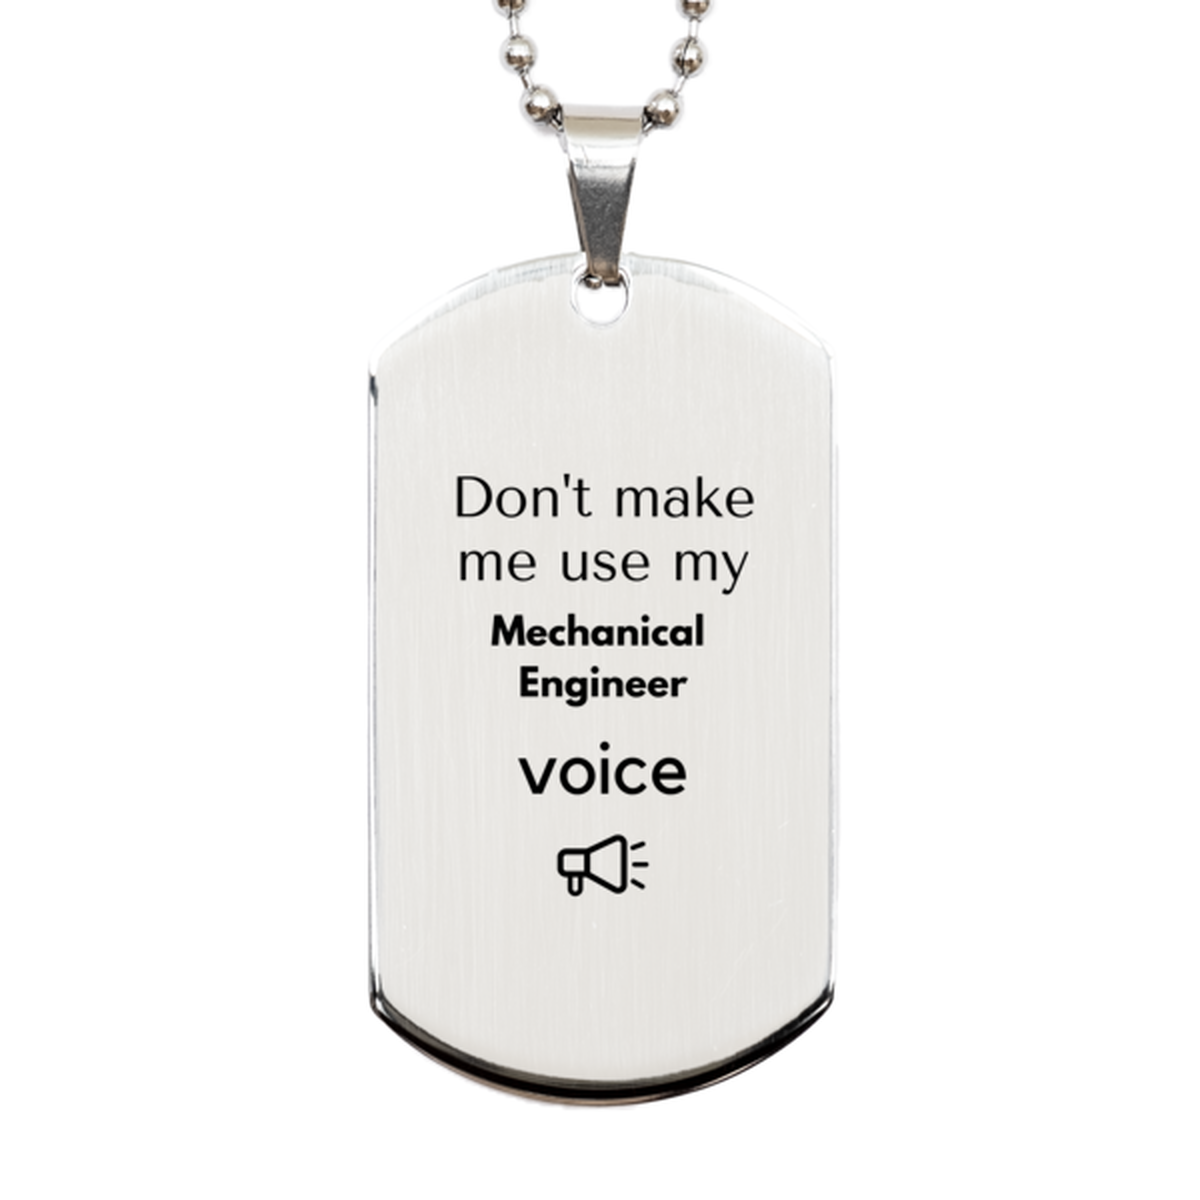 Don't make me use my Mechanical Engineer voice, Sarcasm Mechanical Engineer Gifts, Christmas Mechanical Engineer Silver Dog Tag Birthday Unique Gifts For Mechanical Engineer Coworkers, Men, Women, Colleague, Friends